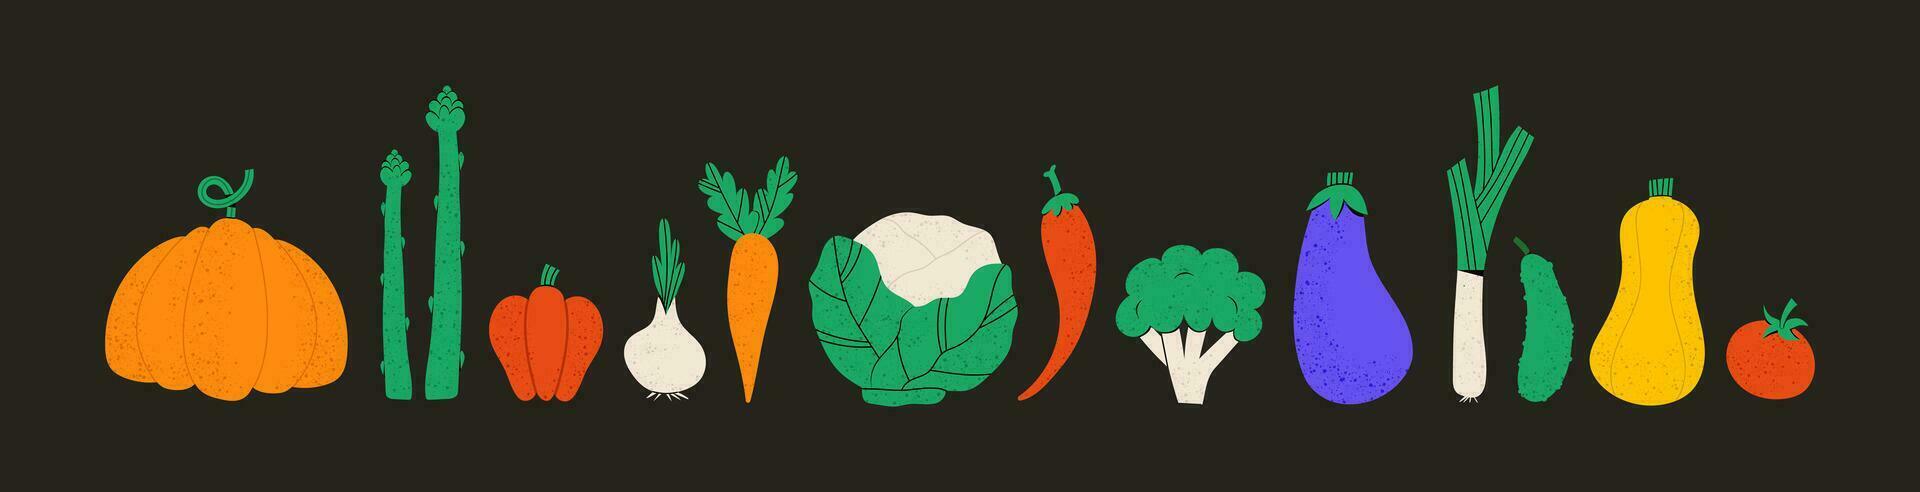 Collection of hand drawn vegetable illustrations isolated on white background. Bundle of fresh delicious vegan diet vegetarian products, wholesome healthy food, cooking ingredients. Flat cartoon style vector